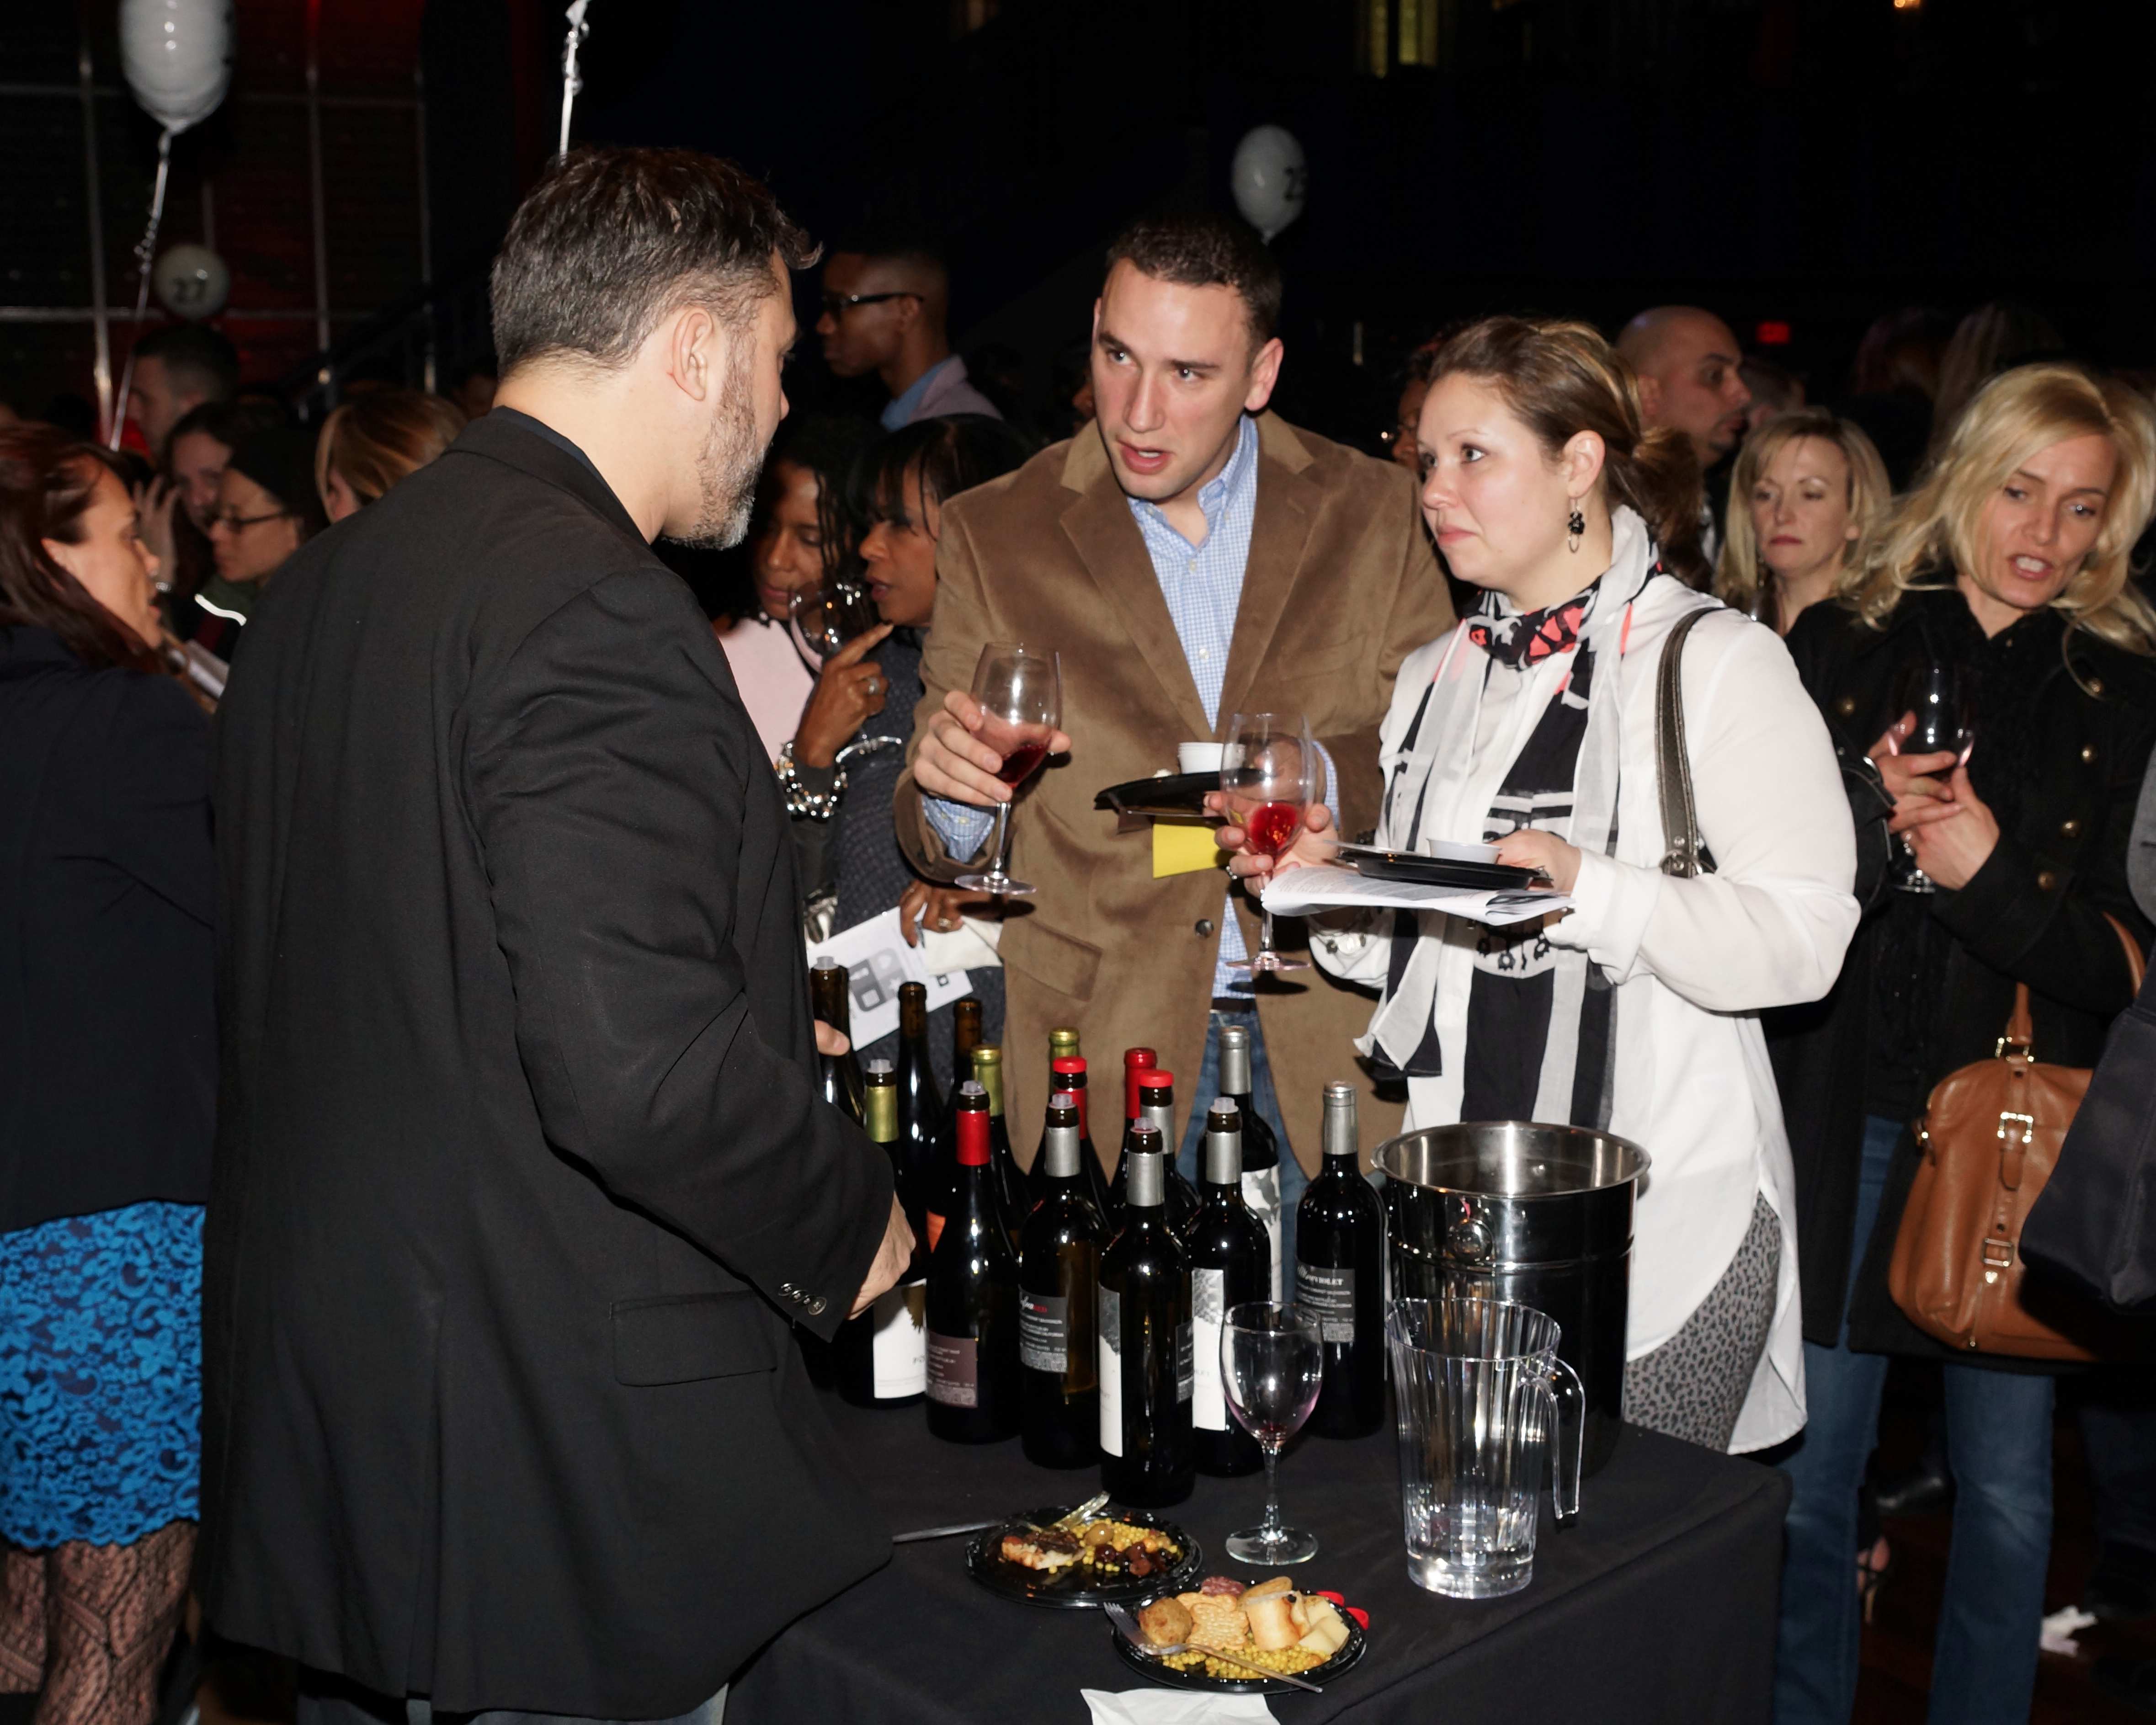 The Annual NYC Winter WIne Festival takes place Saturday, February 7, 2015 at the Best Buy Theater in Times Square with 250+ wines to taste, live music and light accompaniments.